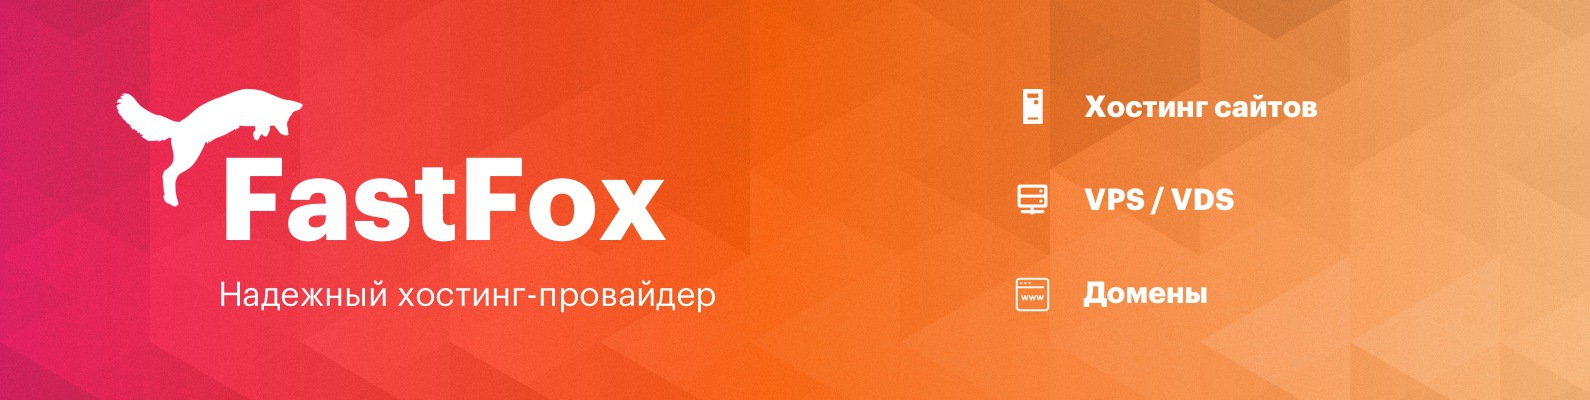 FASTFOX. FASTFOX icon. FASTFOX PNG. FASTFOX.Pro картинка PNG. Testing host